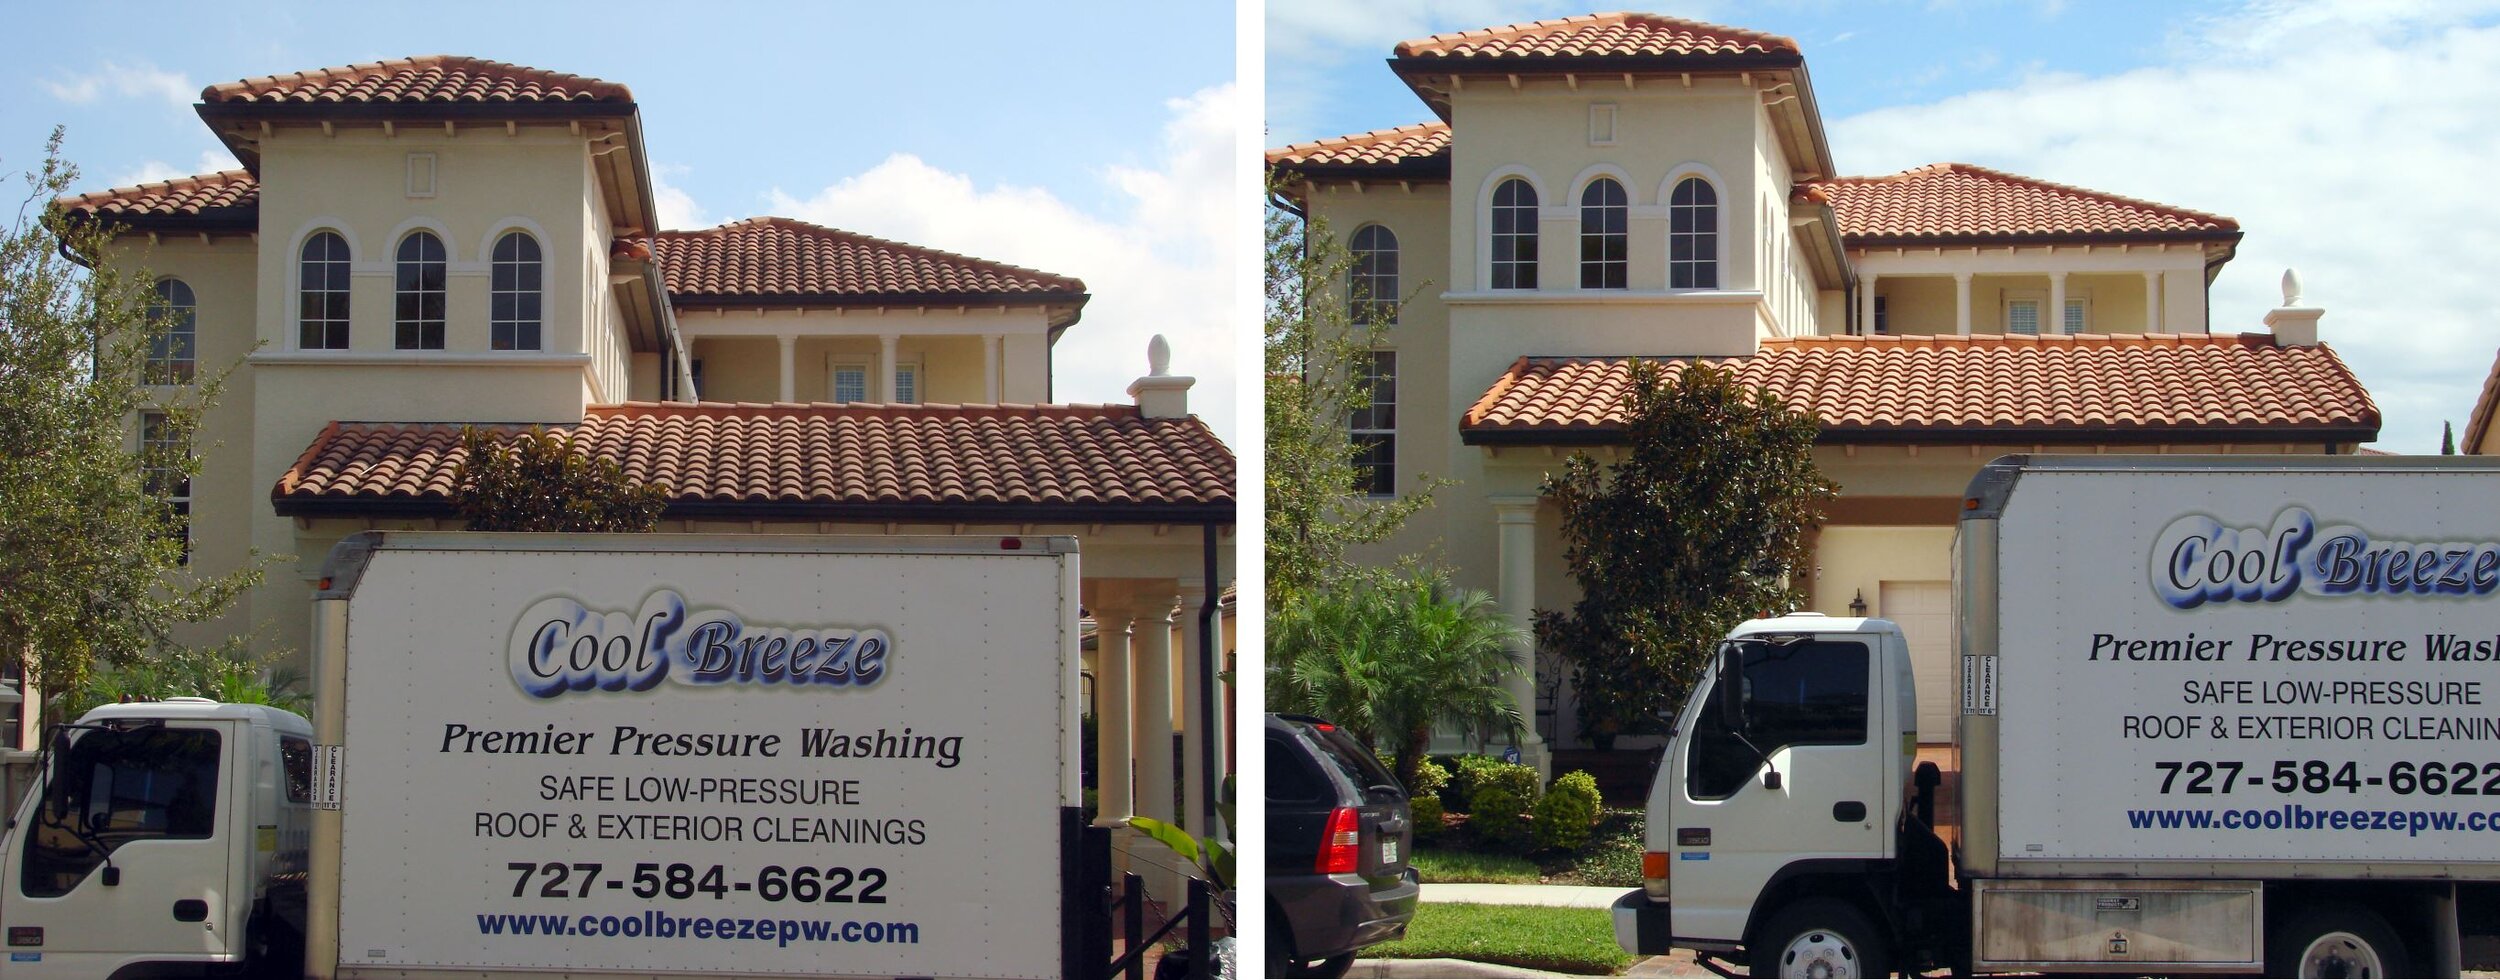 Tampa Yacht Club - Before &amp; After Roof Cleaning (Copy) (Copy)